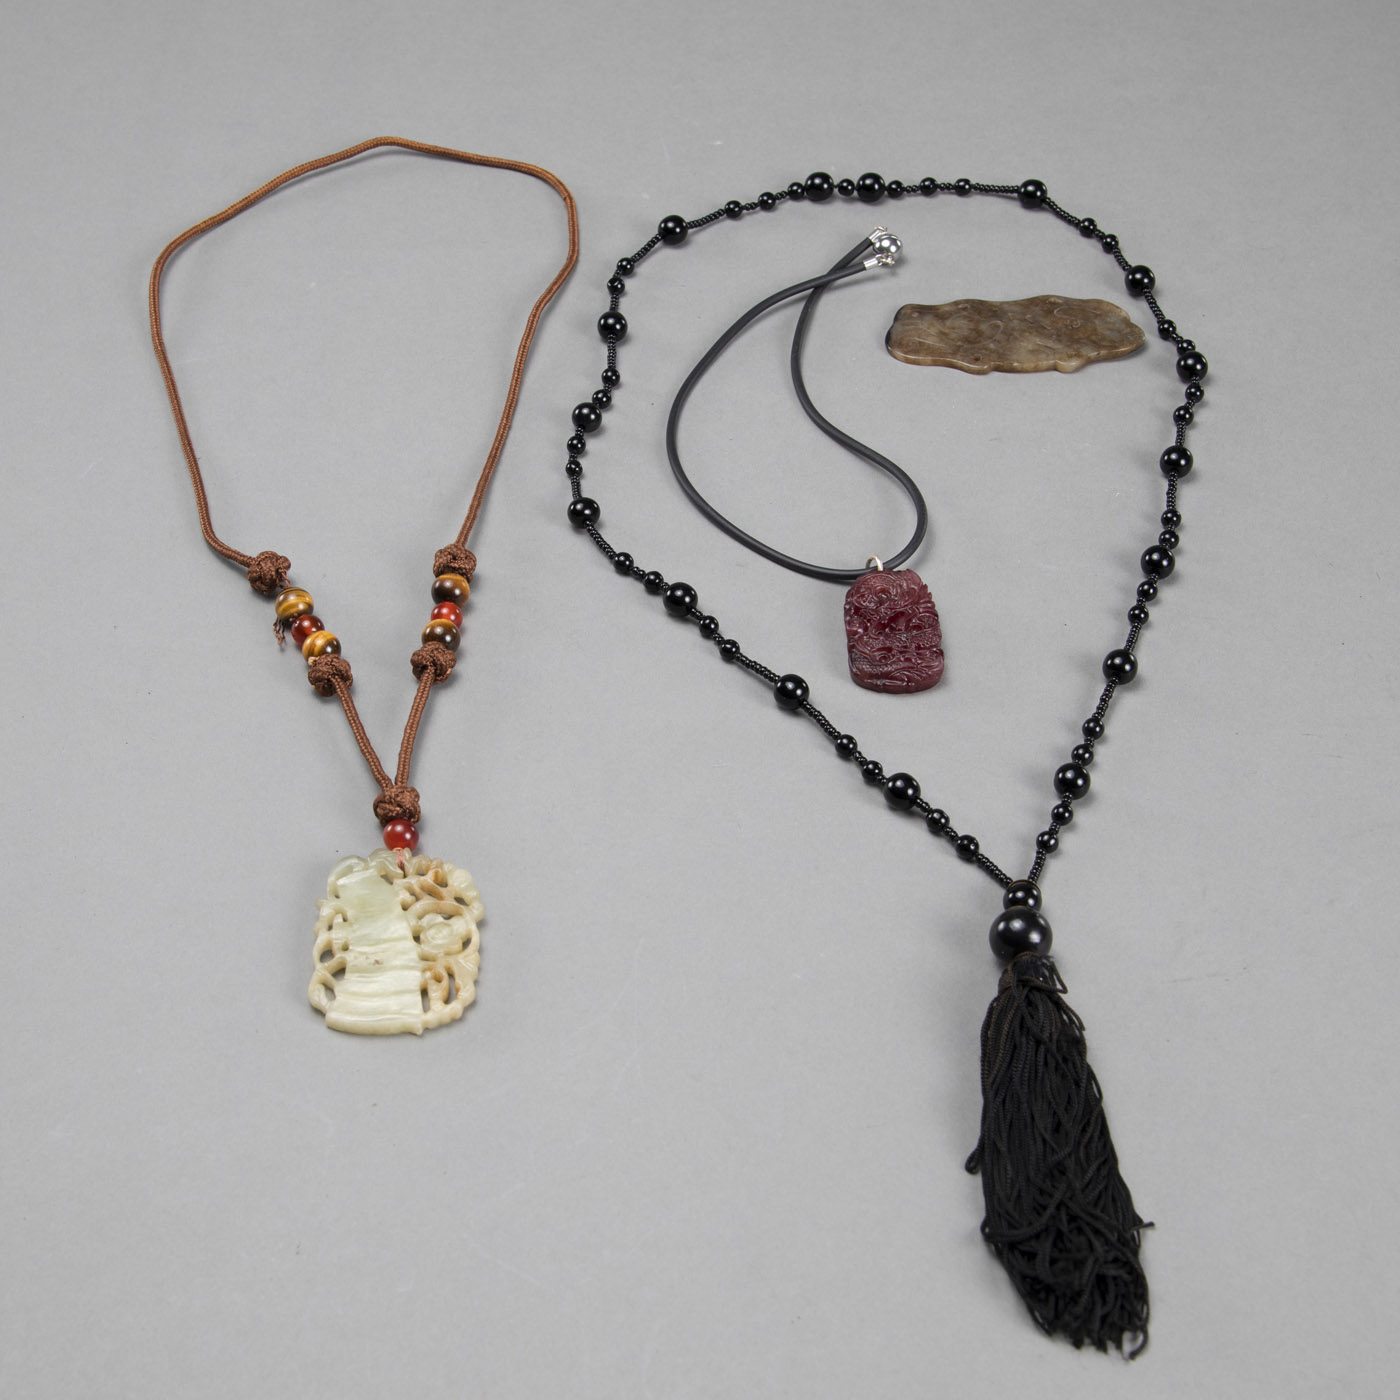 <b>THREE PENDANTS CARVED FROM JADE AND OTHER MATERIALS AND A CHAIN WITH BLACK BEADS</b>